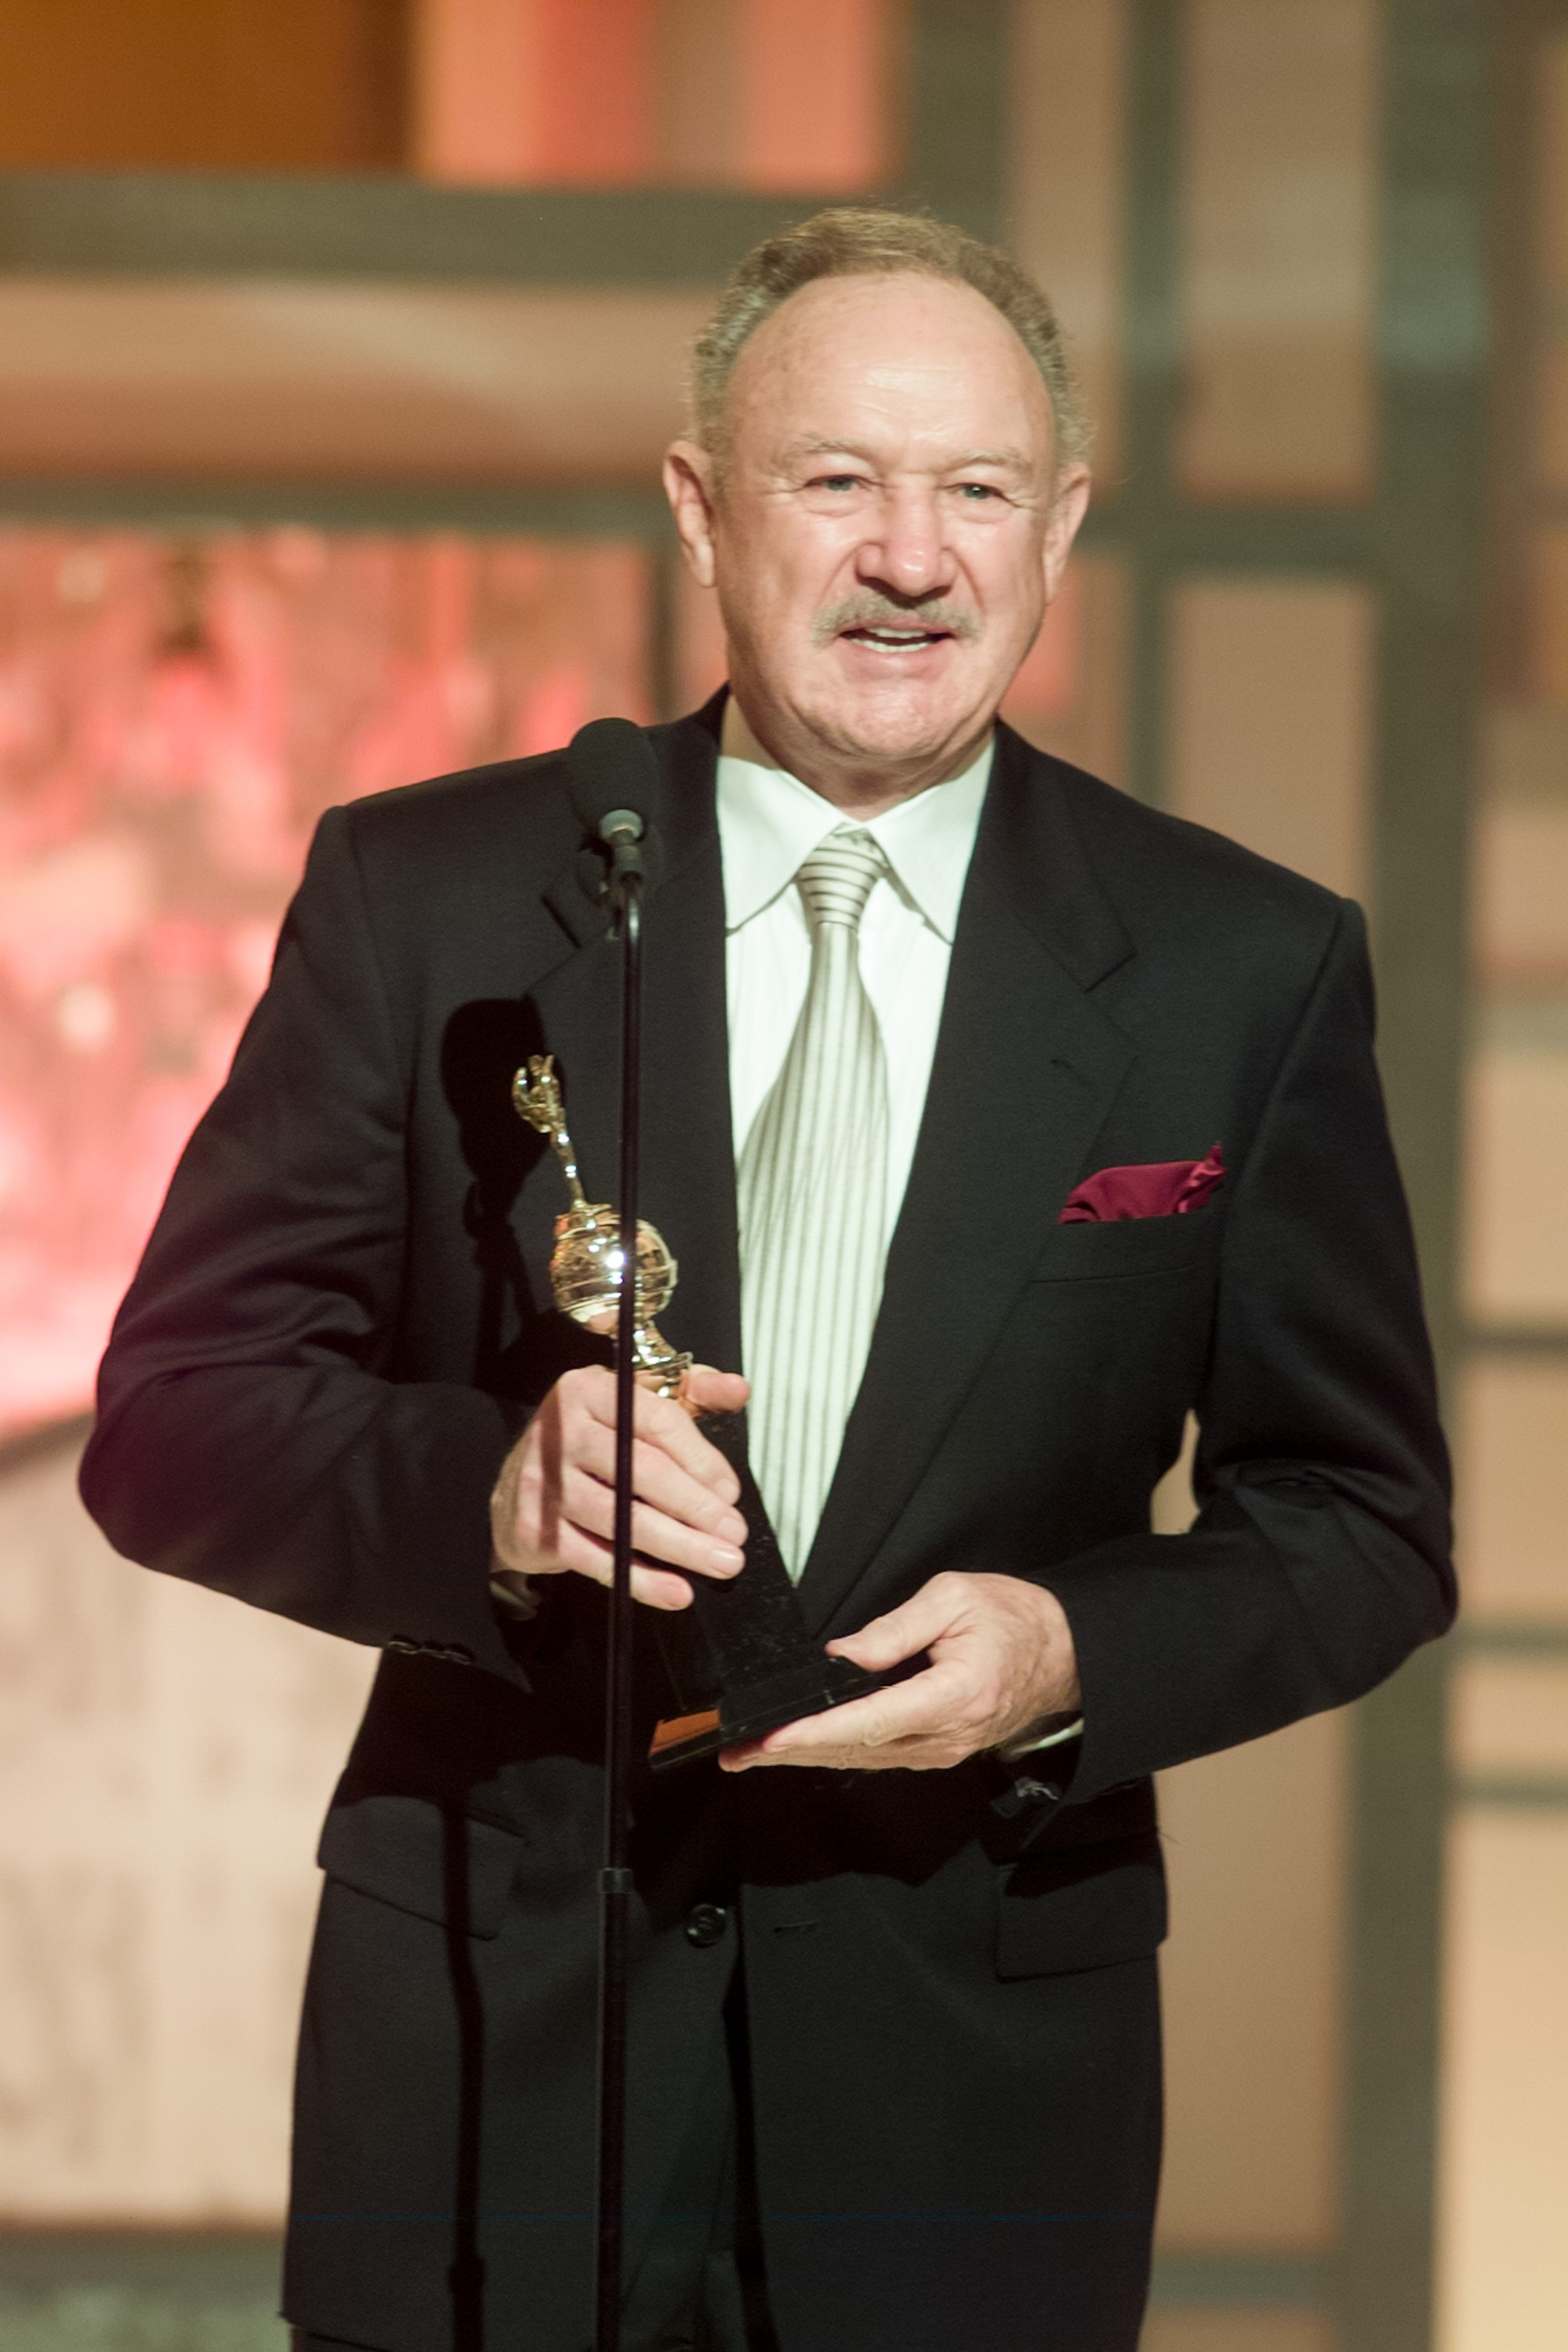 Actor Gene Hackman accepts the Cecil B. DeMille award on stage at the 60th Annual Golden Globe Awards held at the Beverly Hilton Hotel on January 19, 2003. | Source: Getty Images